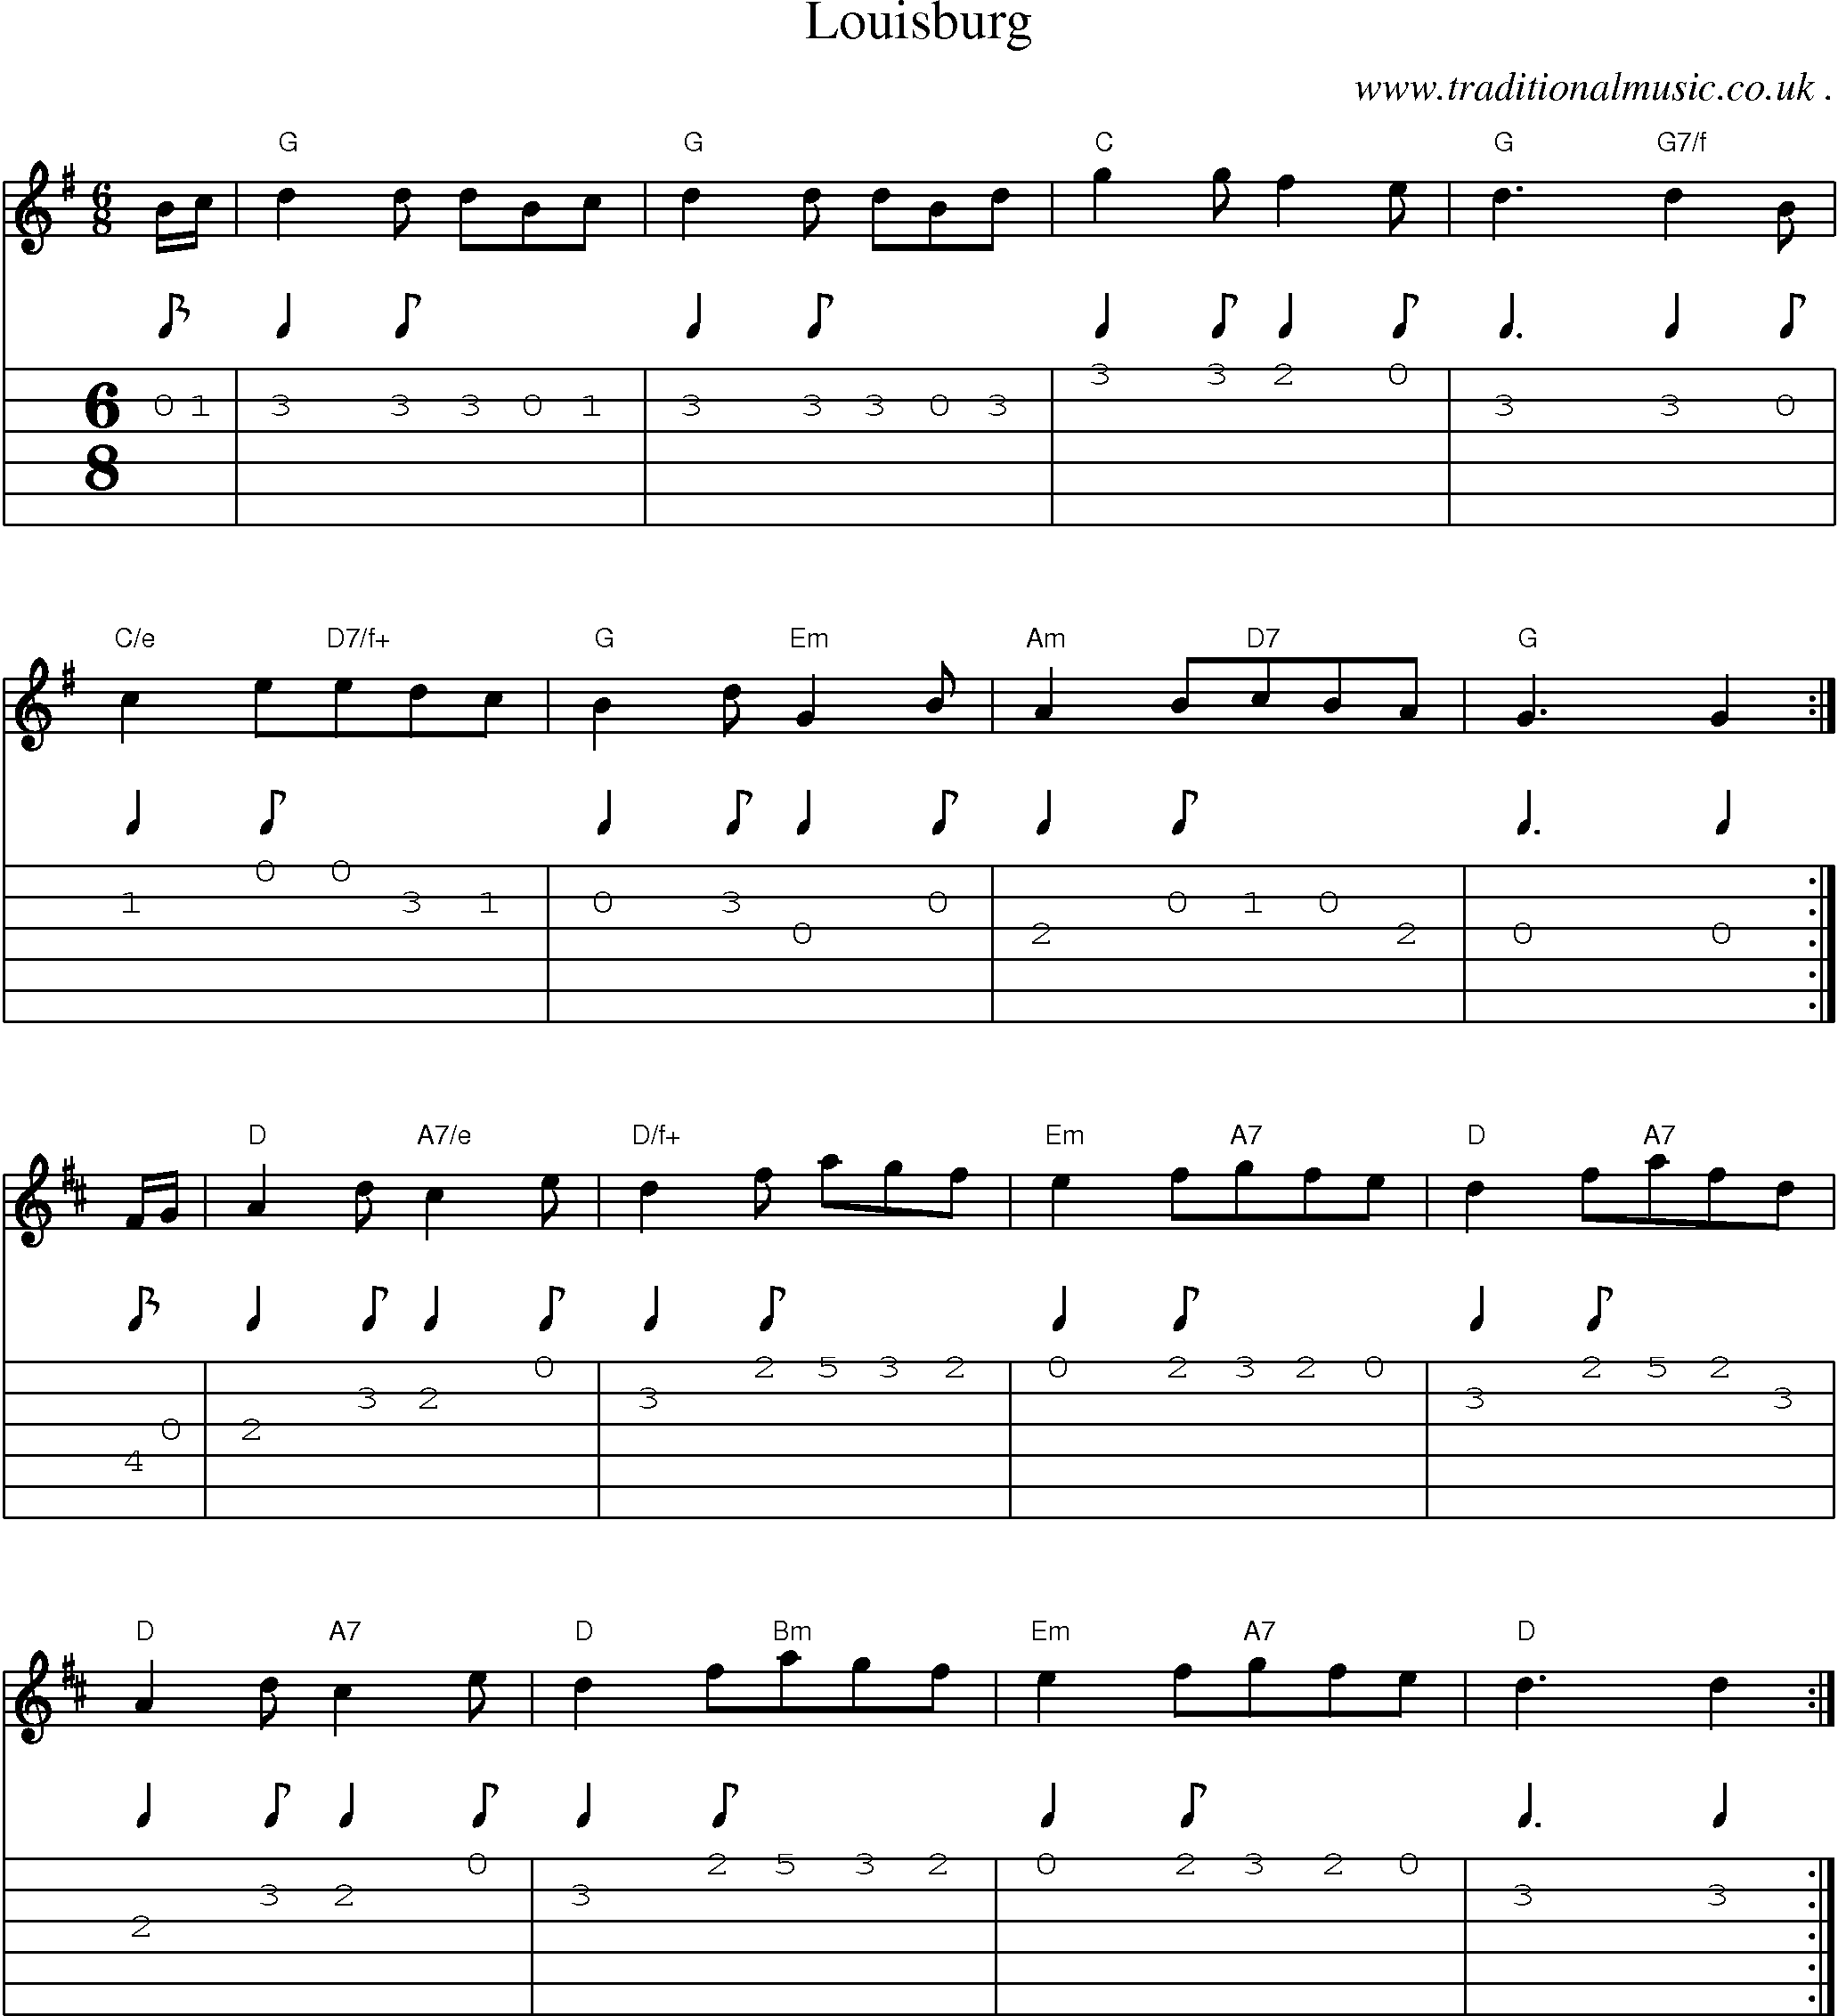 Sheet-Music and Guitar Tabs for Louisburg